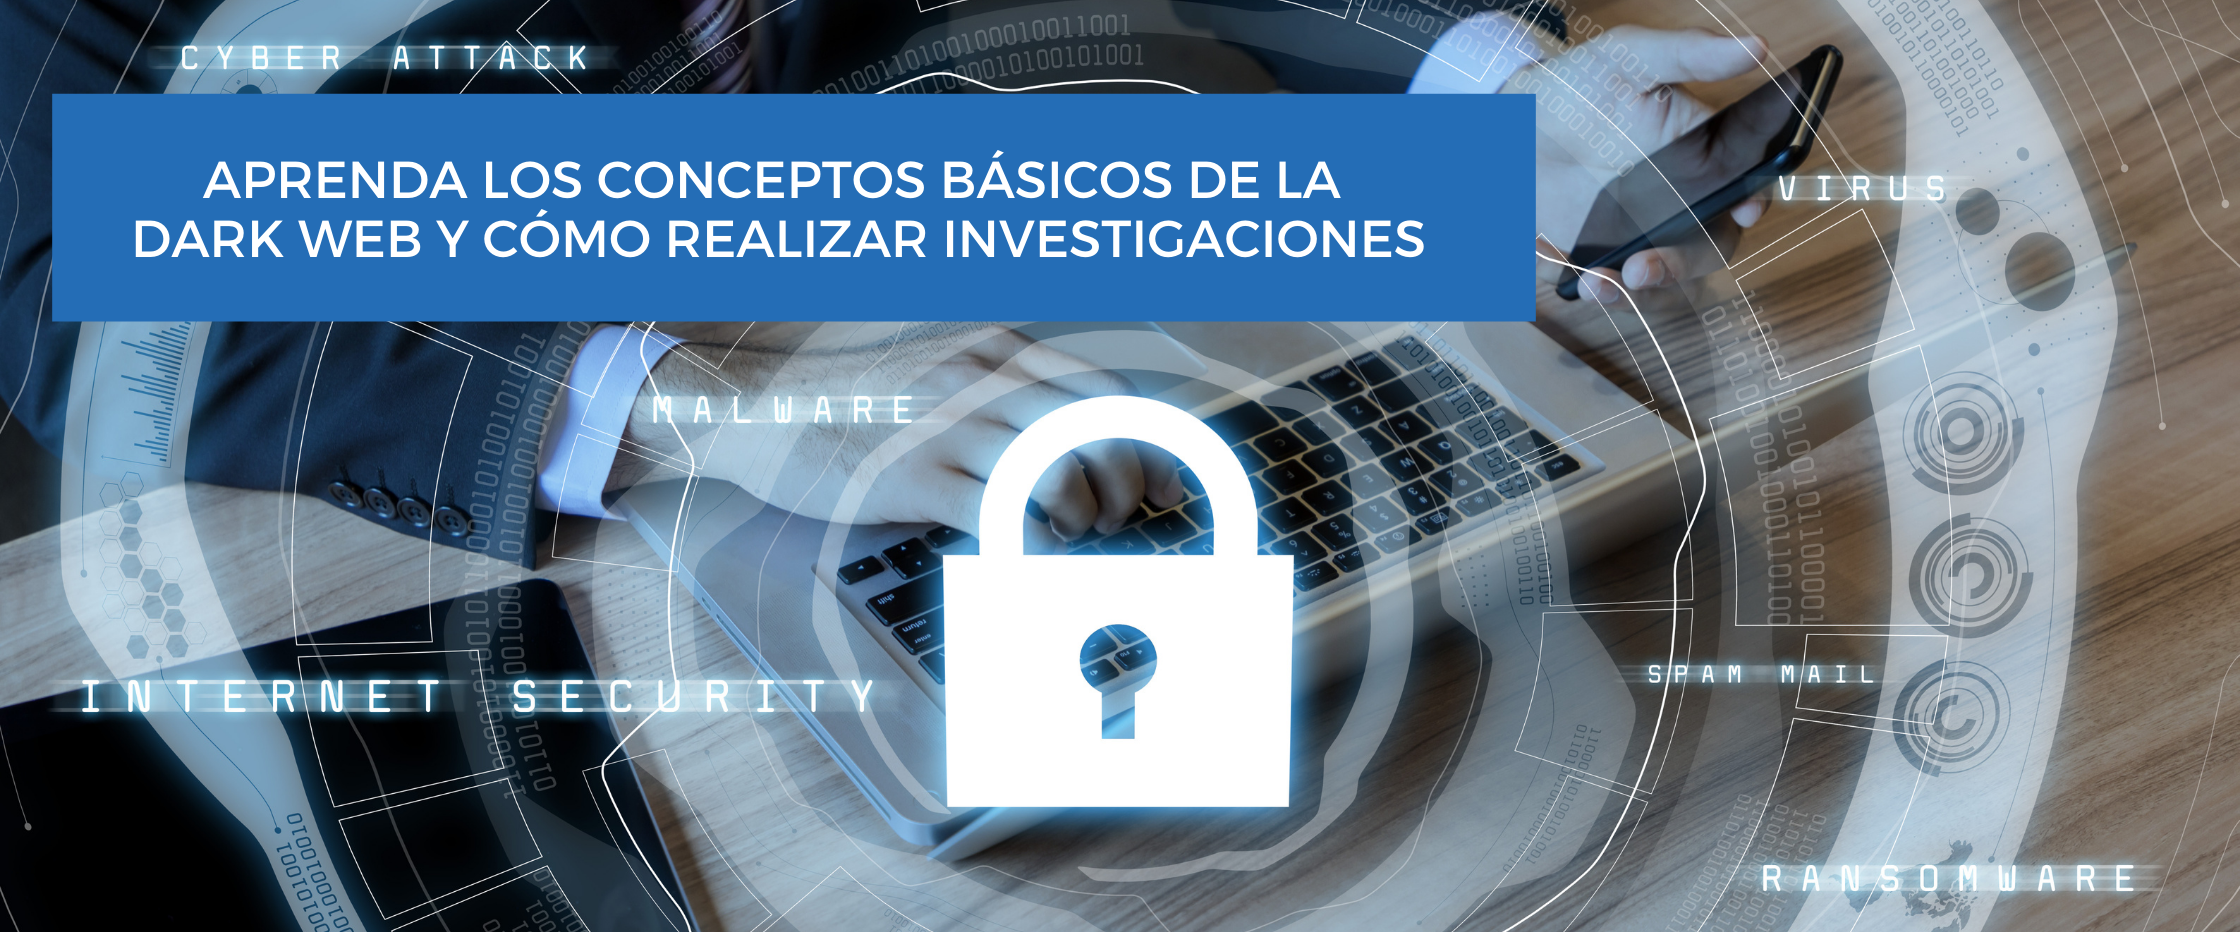 Cyber Threat Intelligence and Analysis COURSE (2)_SPANISH